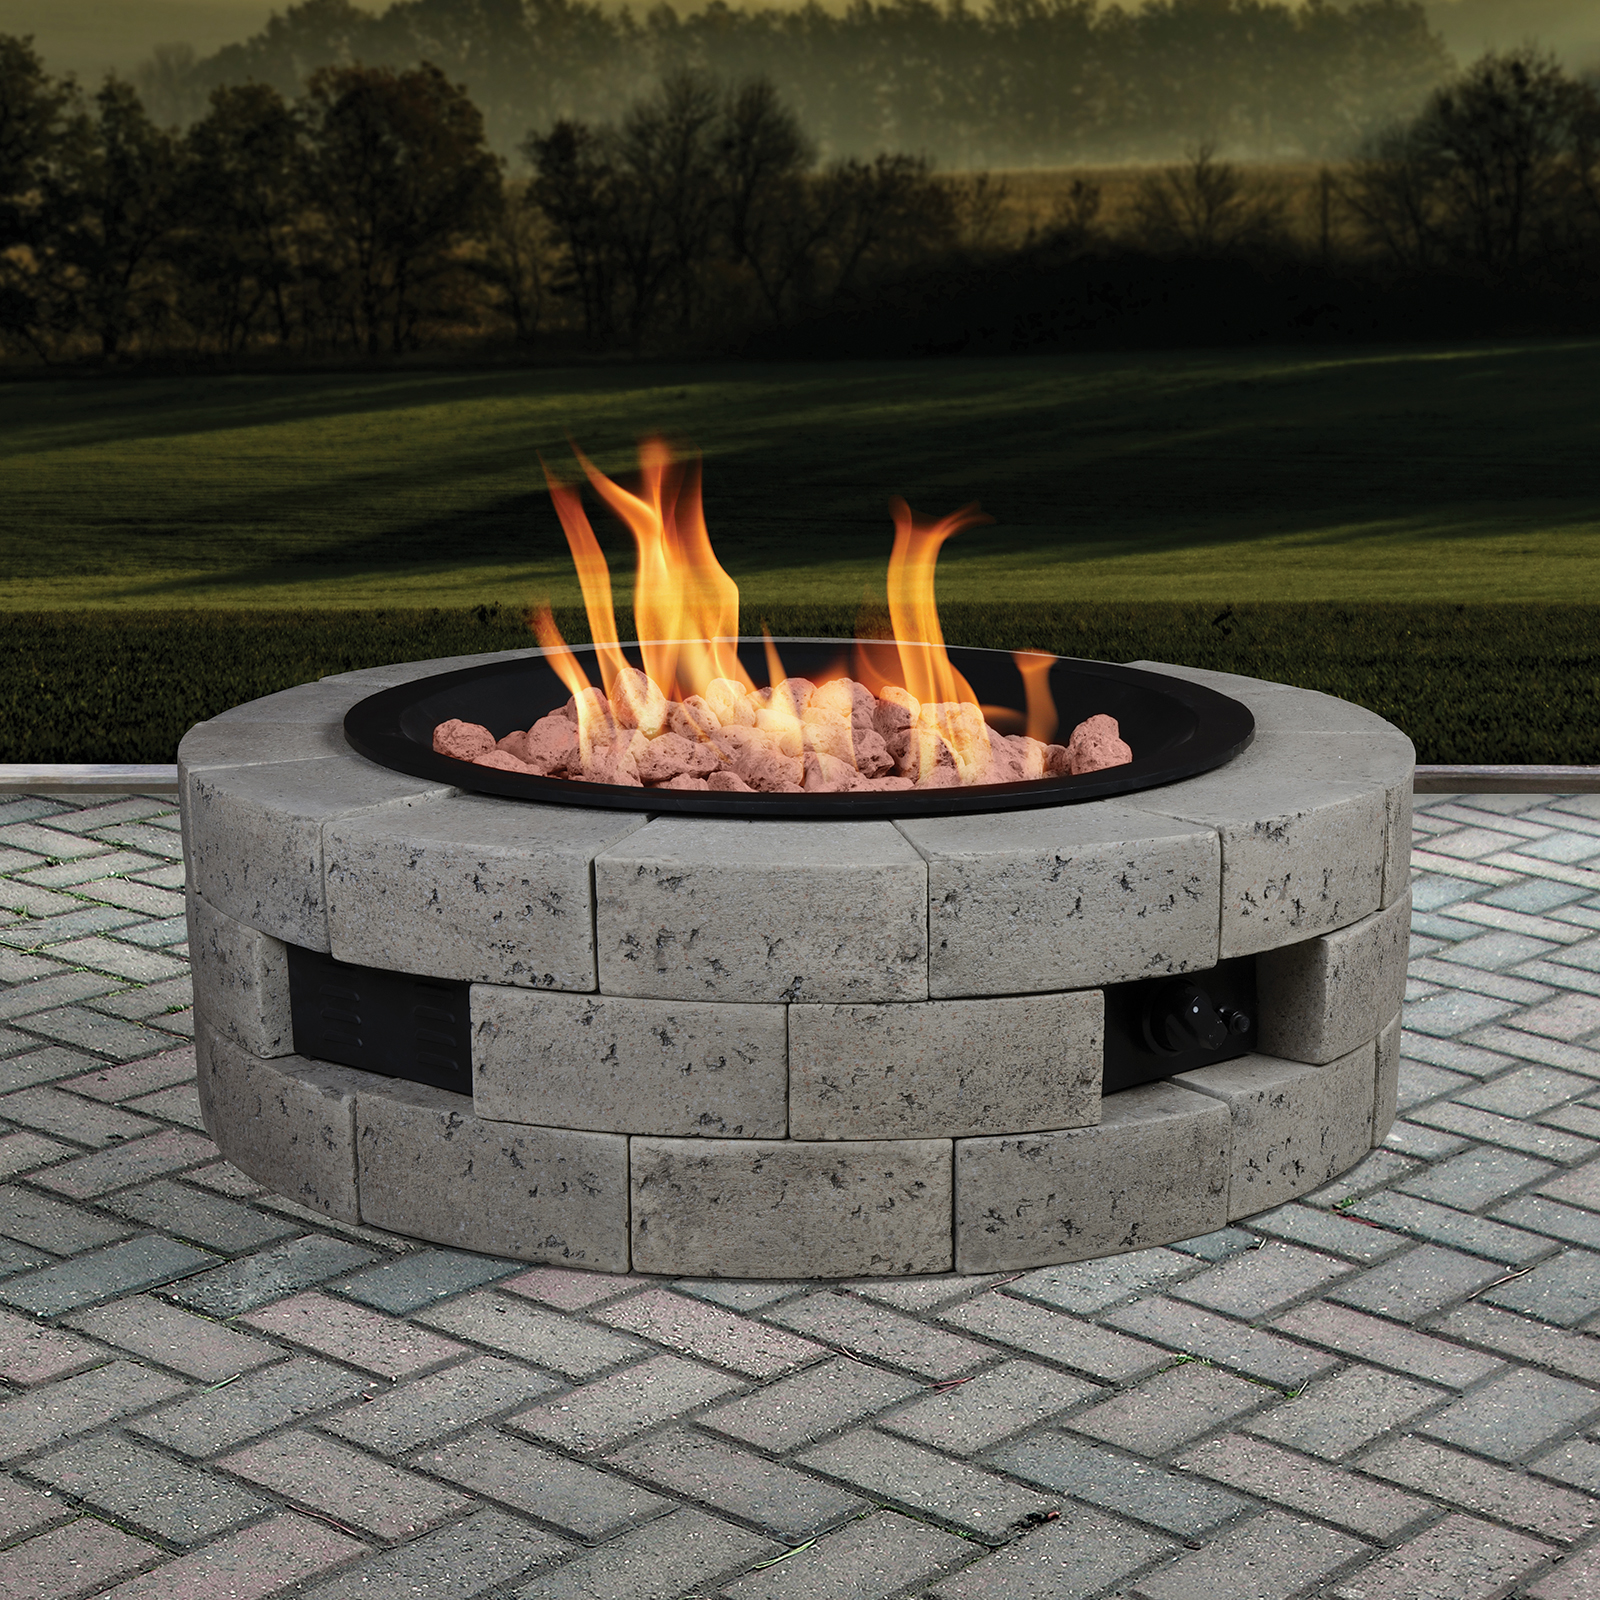 Can this firepit be converted to use Natural gas? | Shop Your Way